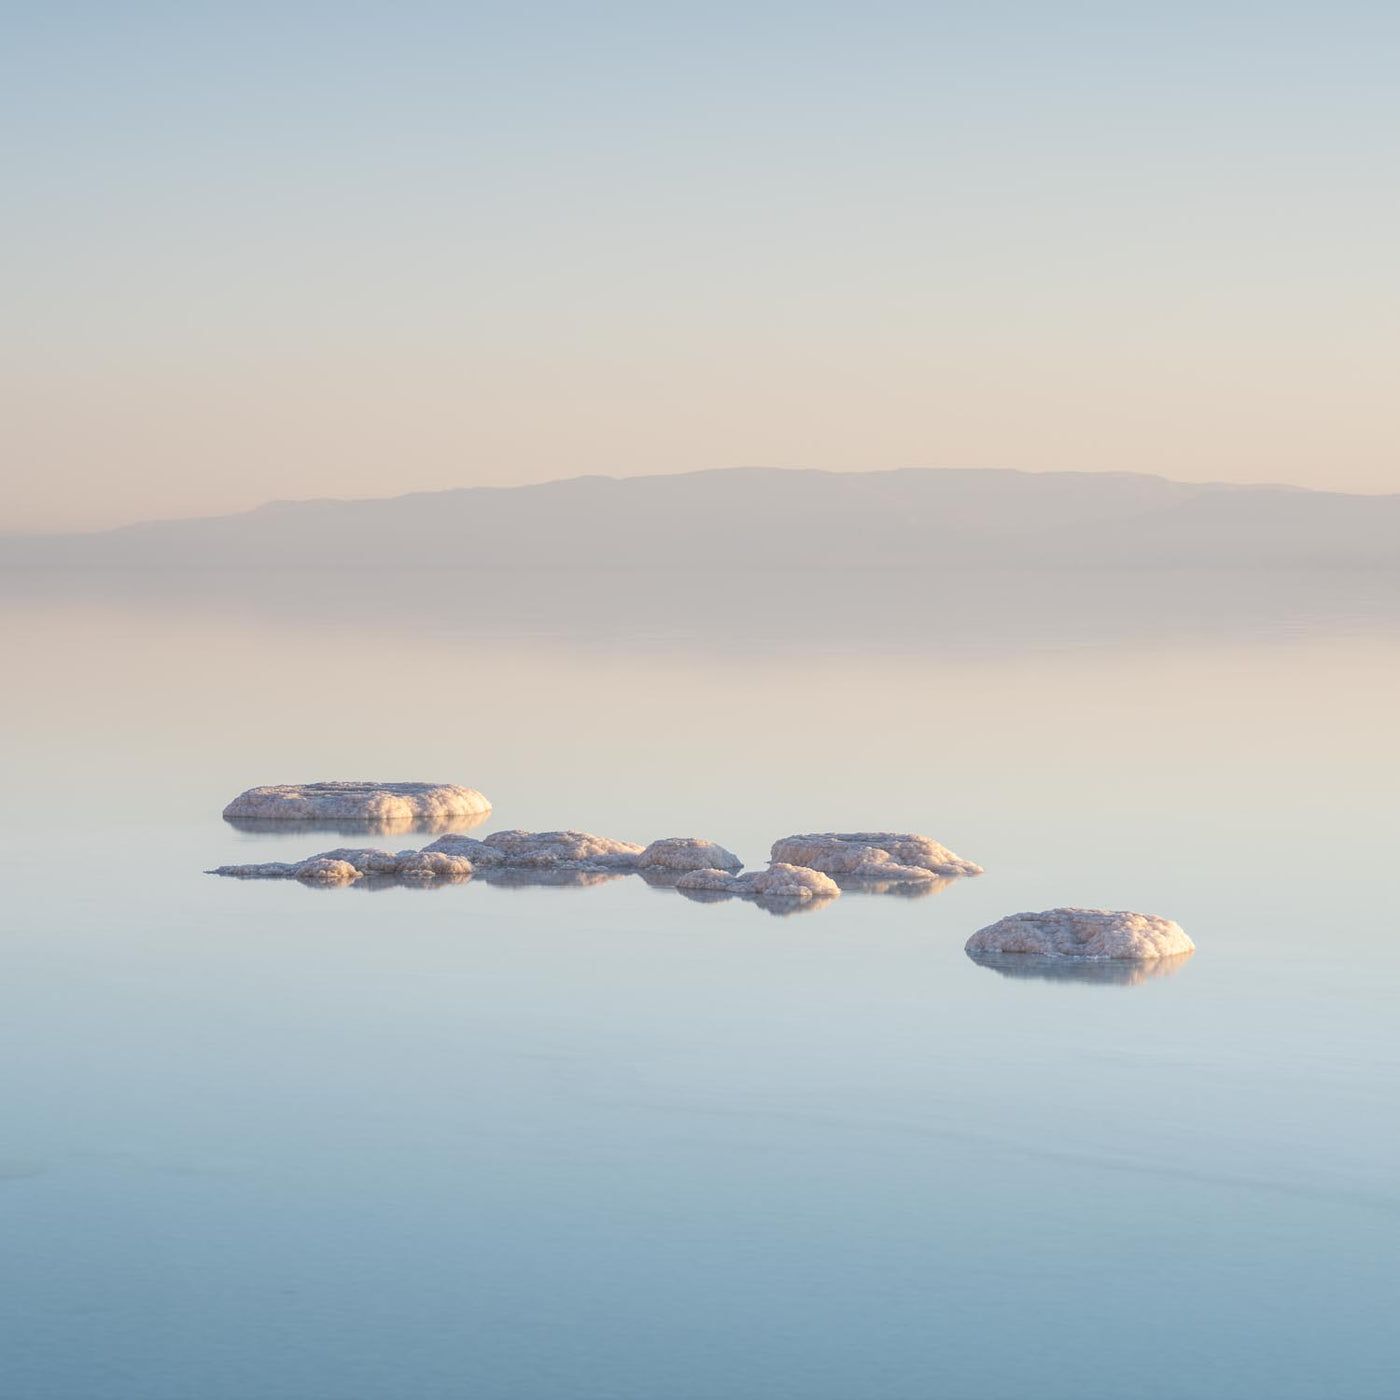 Serenity  - By Yehoshua Aryeh - Photograph of Israel - Dead Sea